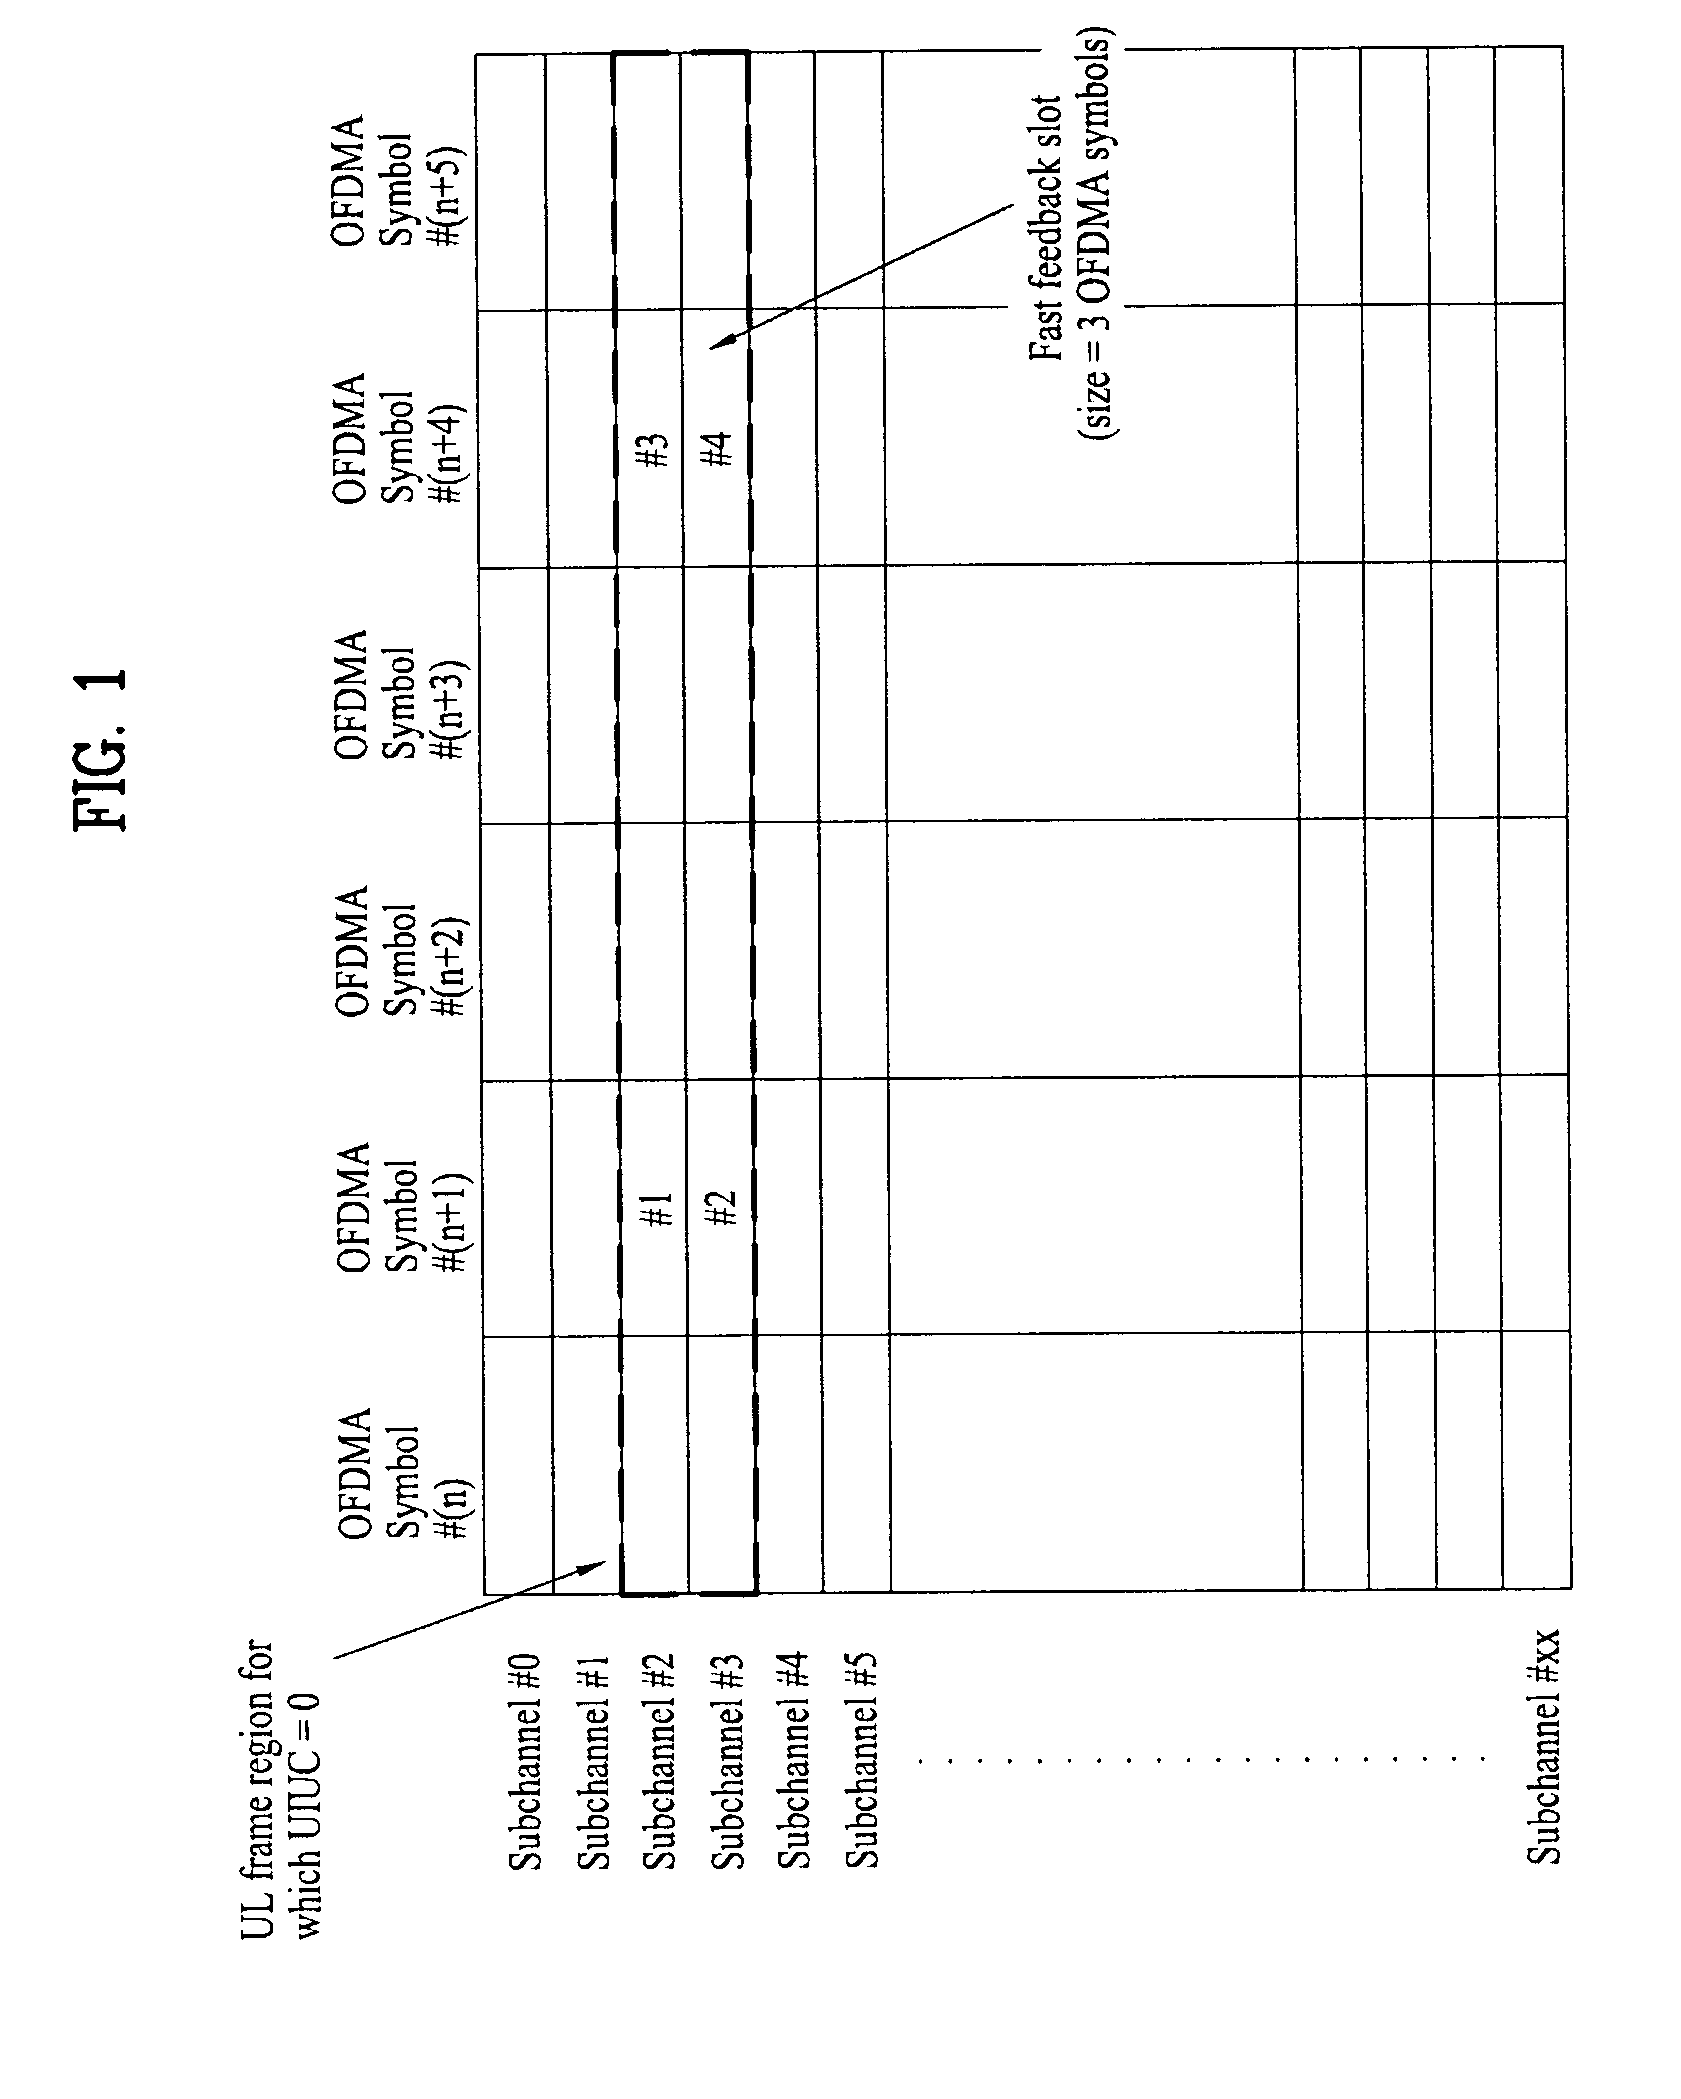 Method of emergency service request using control channel